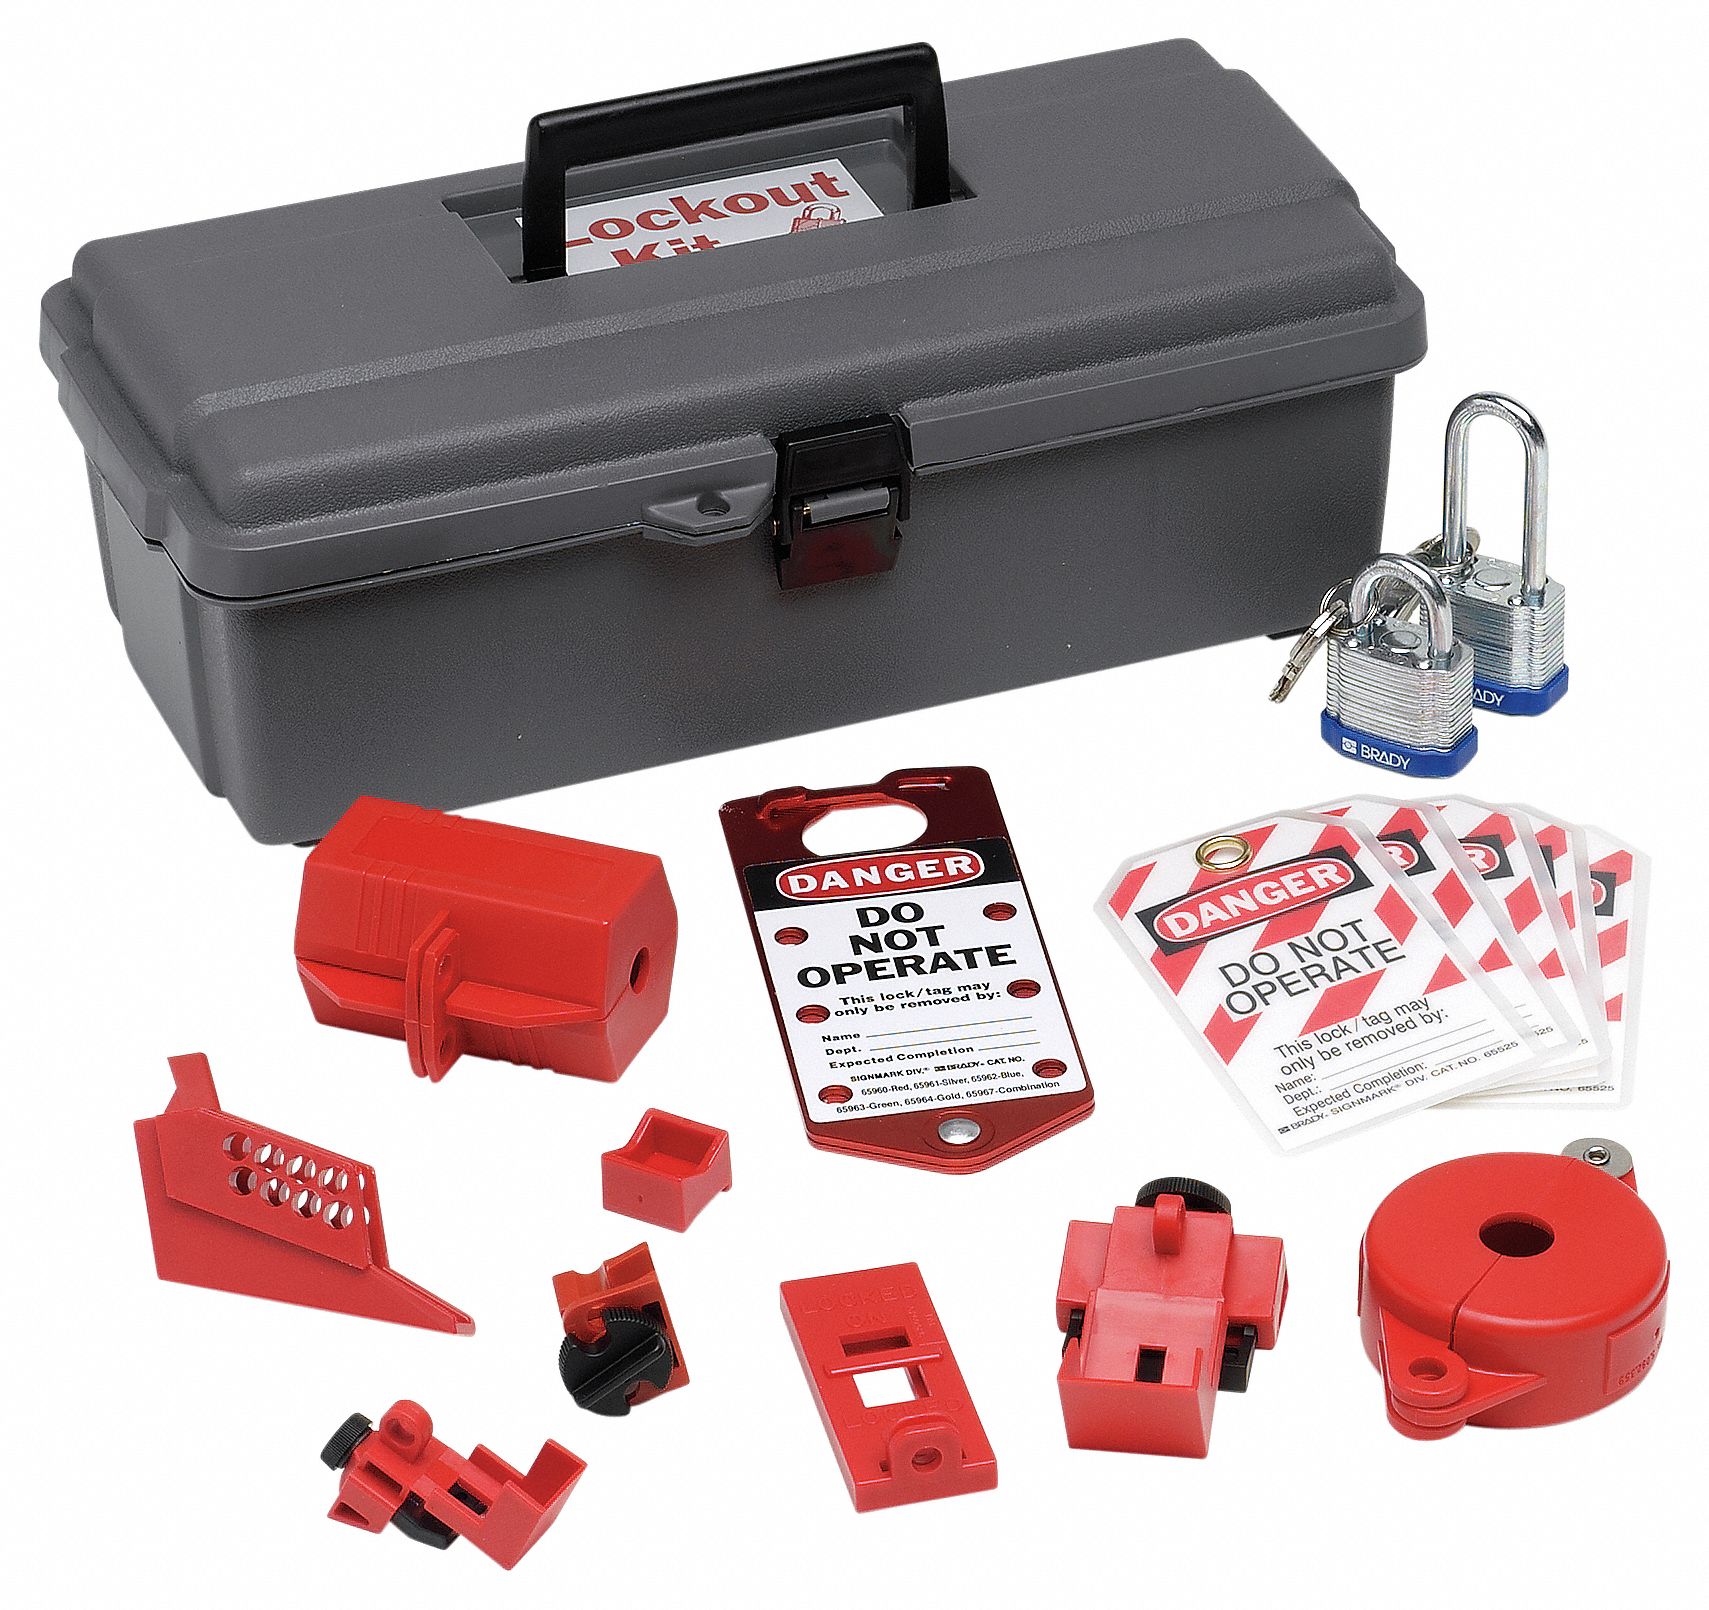 Details about   Masterlock 4HY67 Portable Lockout Kit w/ Red Satchel Filled 